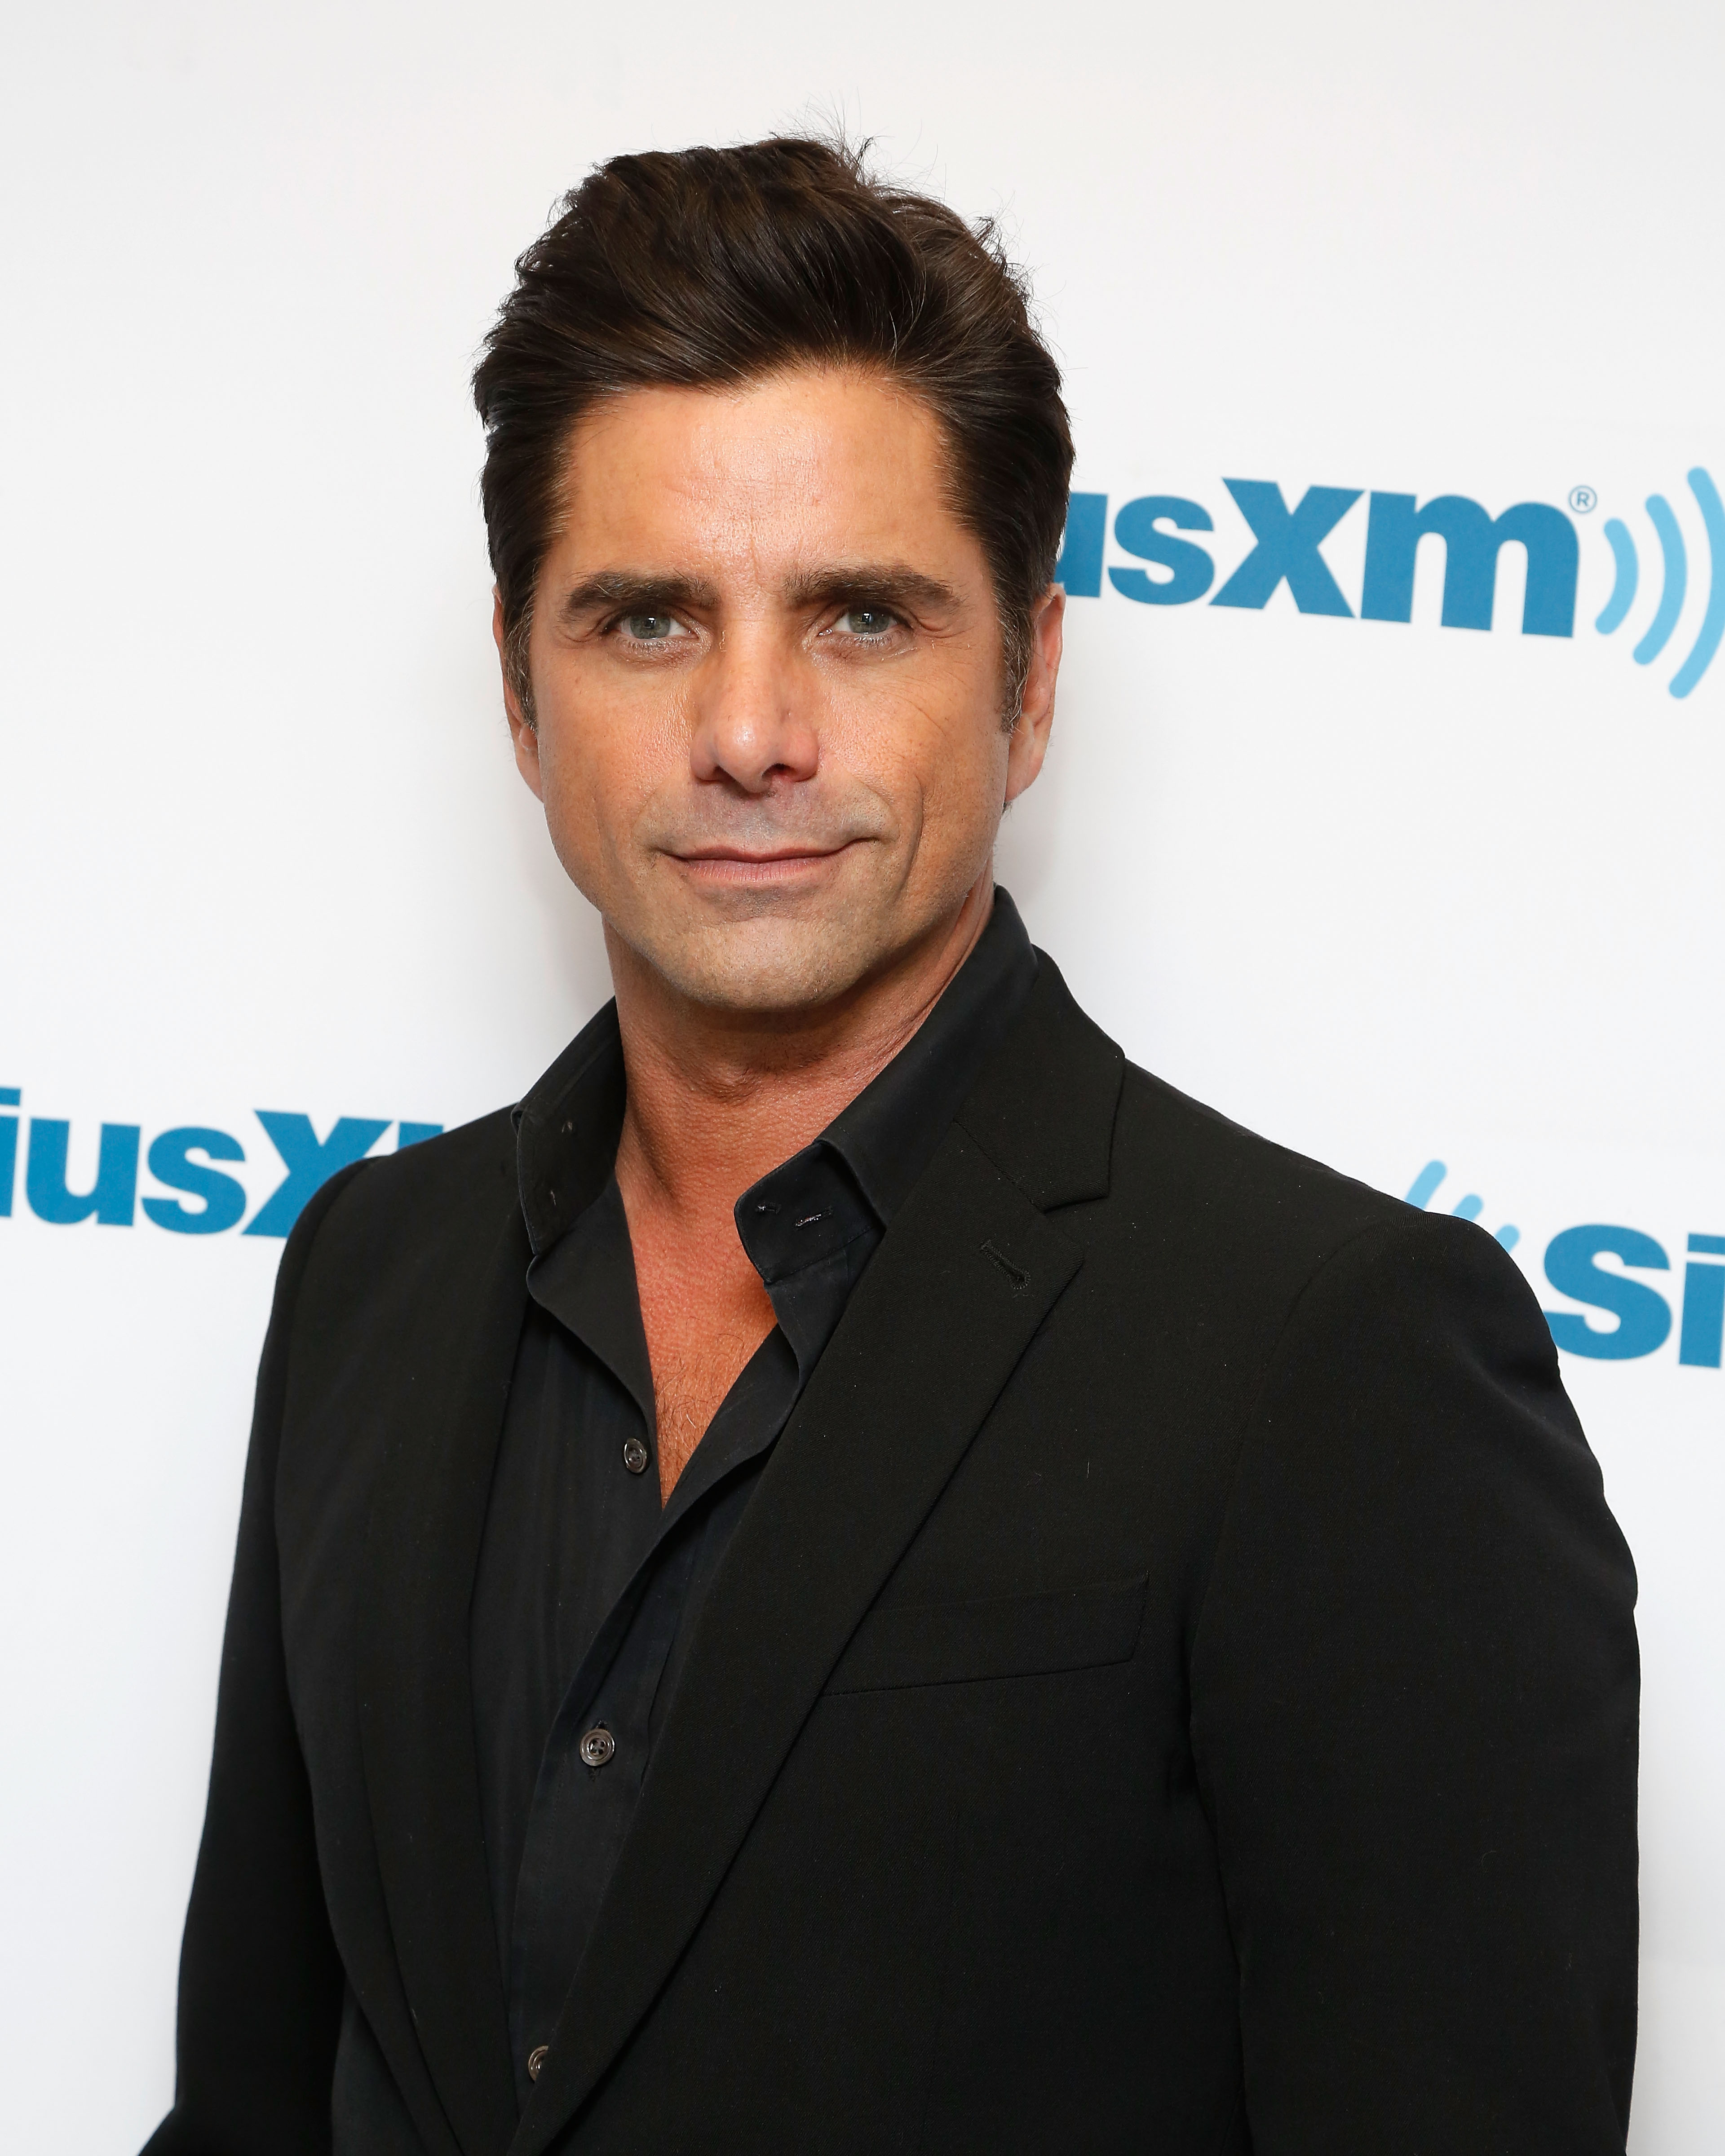 Actor John Stamos visits the SiriusXM Studios on January 4, 2016 in New York City. (Taylor Hill&mdash;Getty Images)